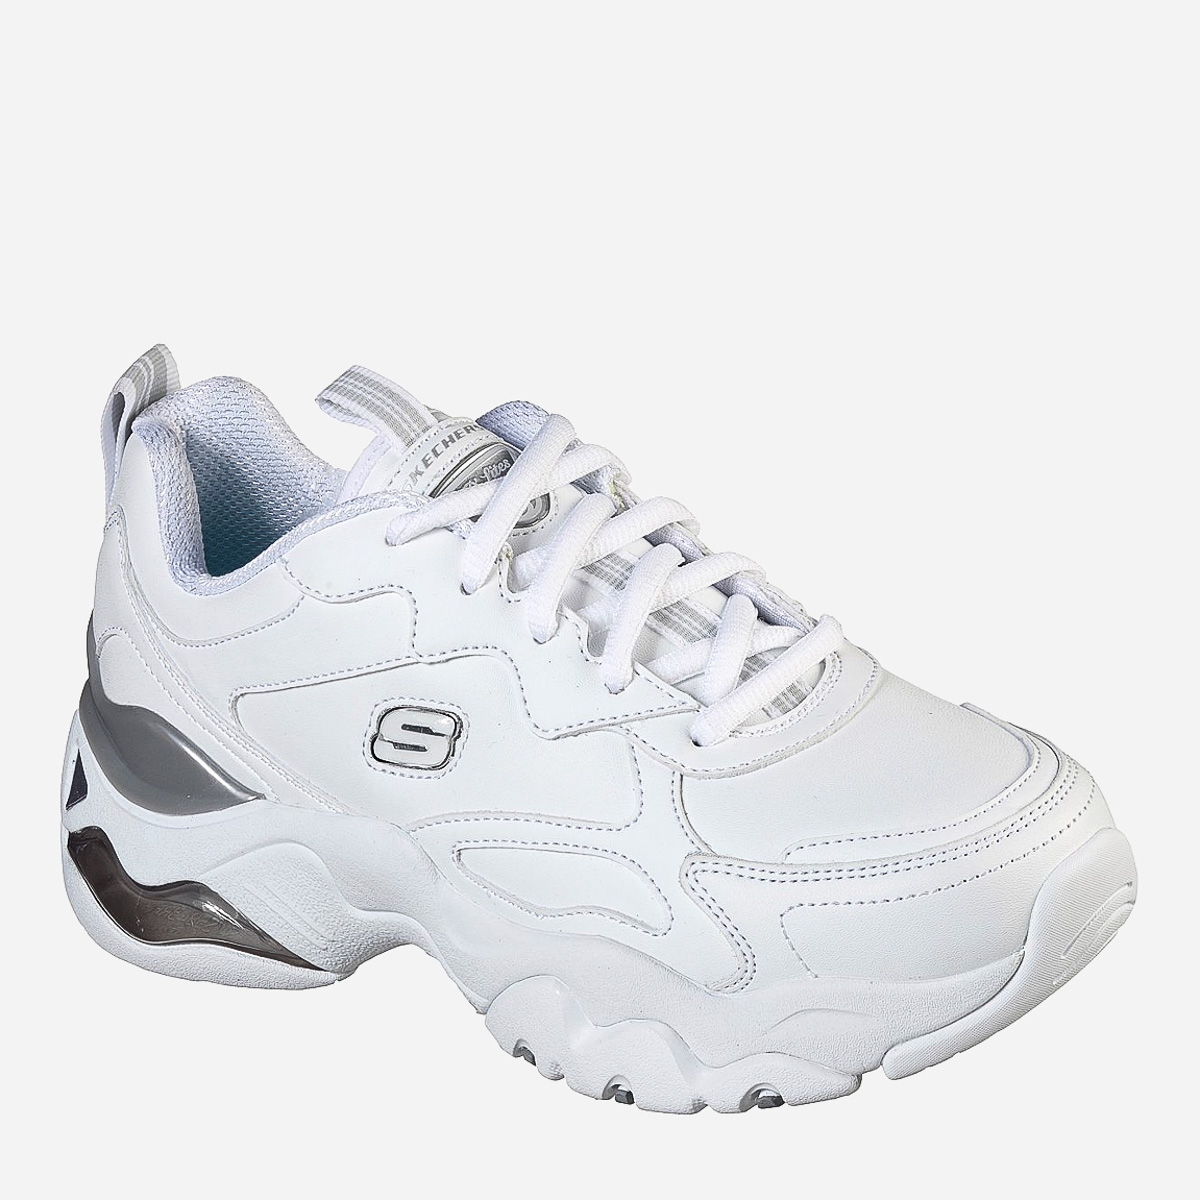 how much is skechers wedge sneakers in the philippines